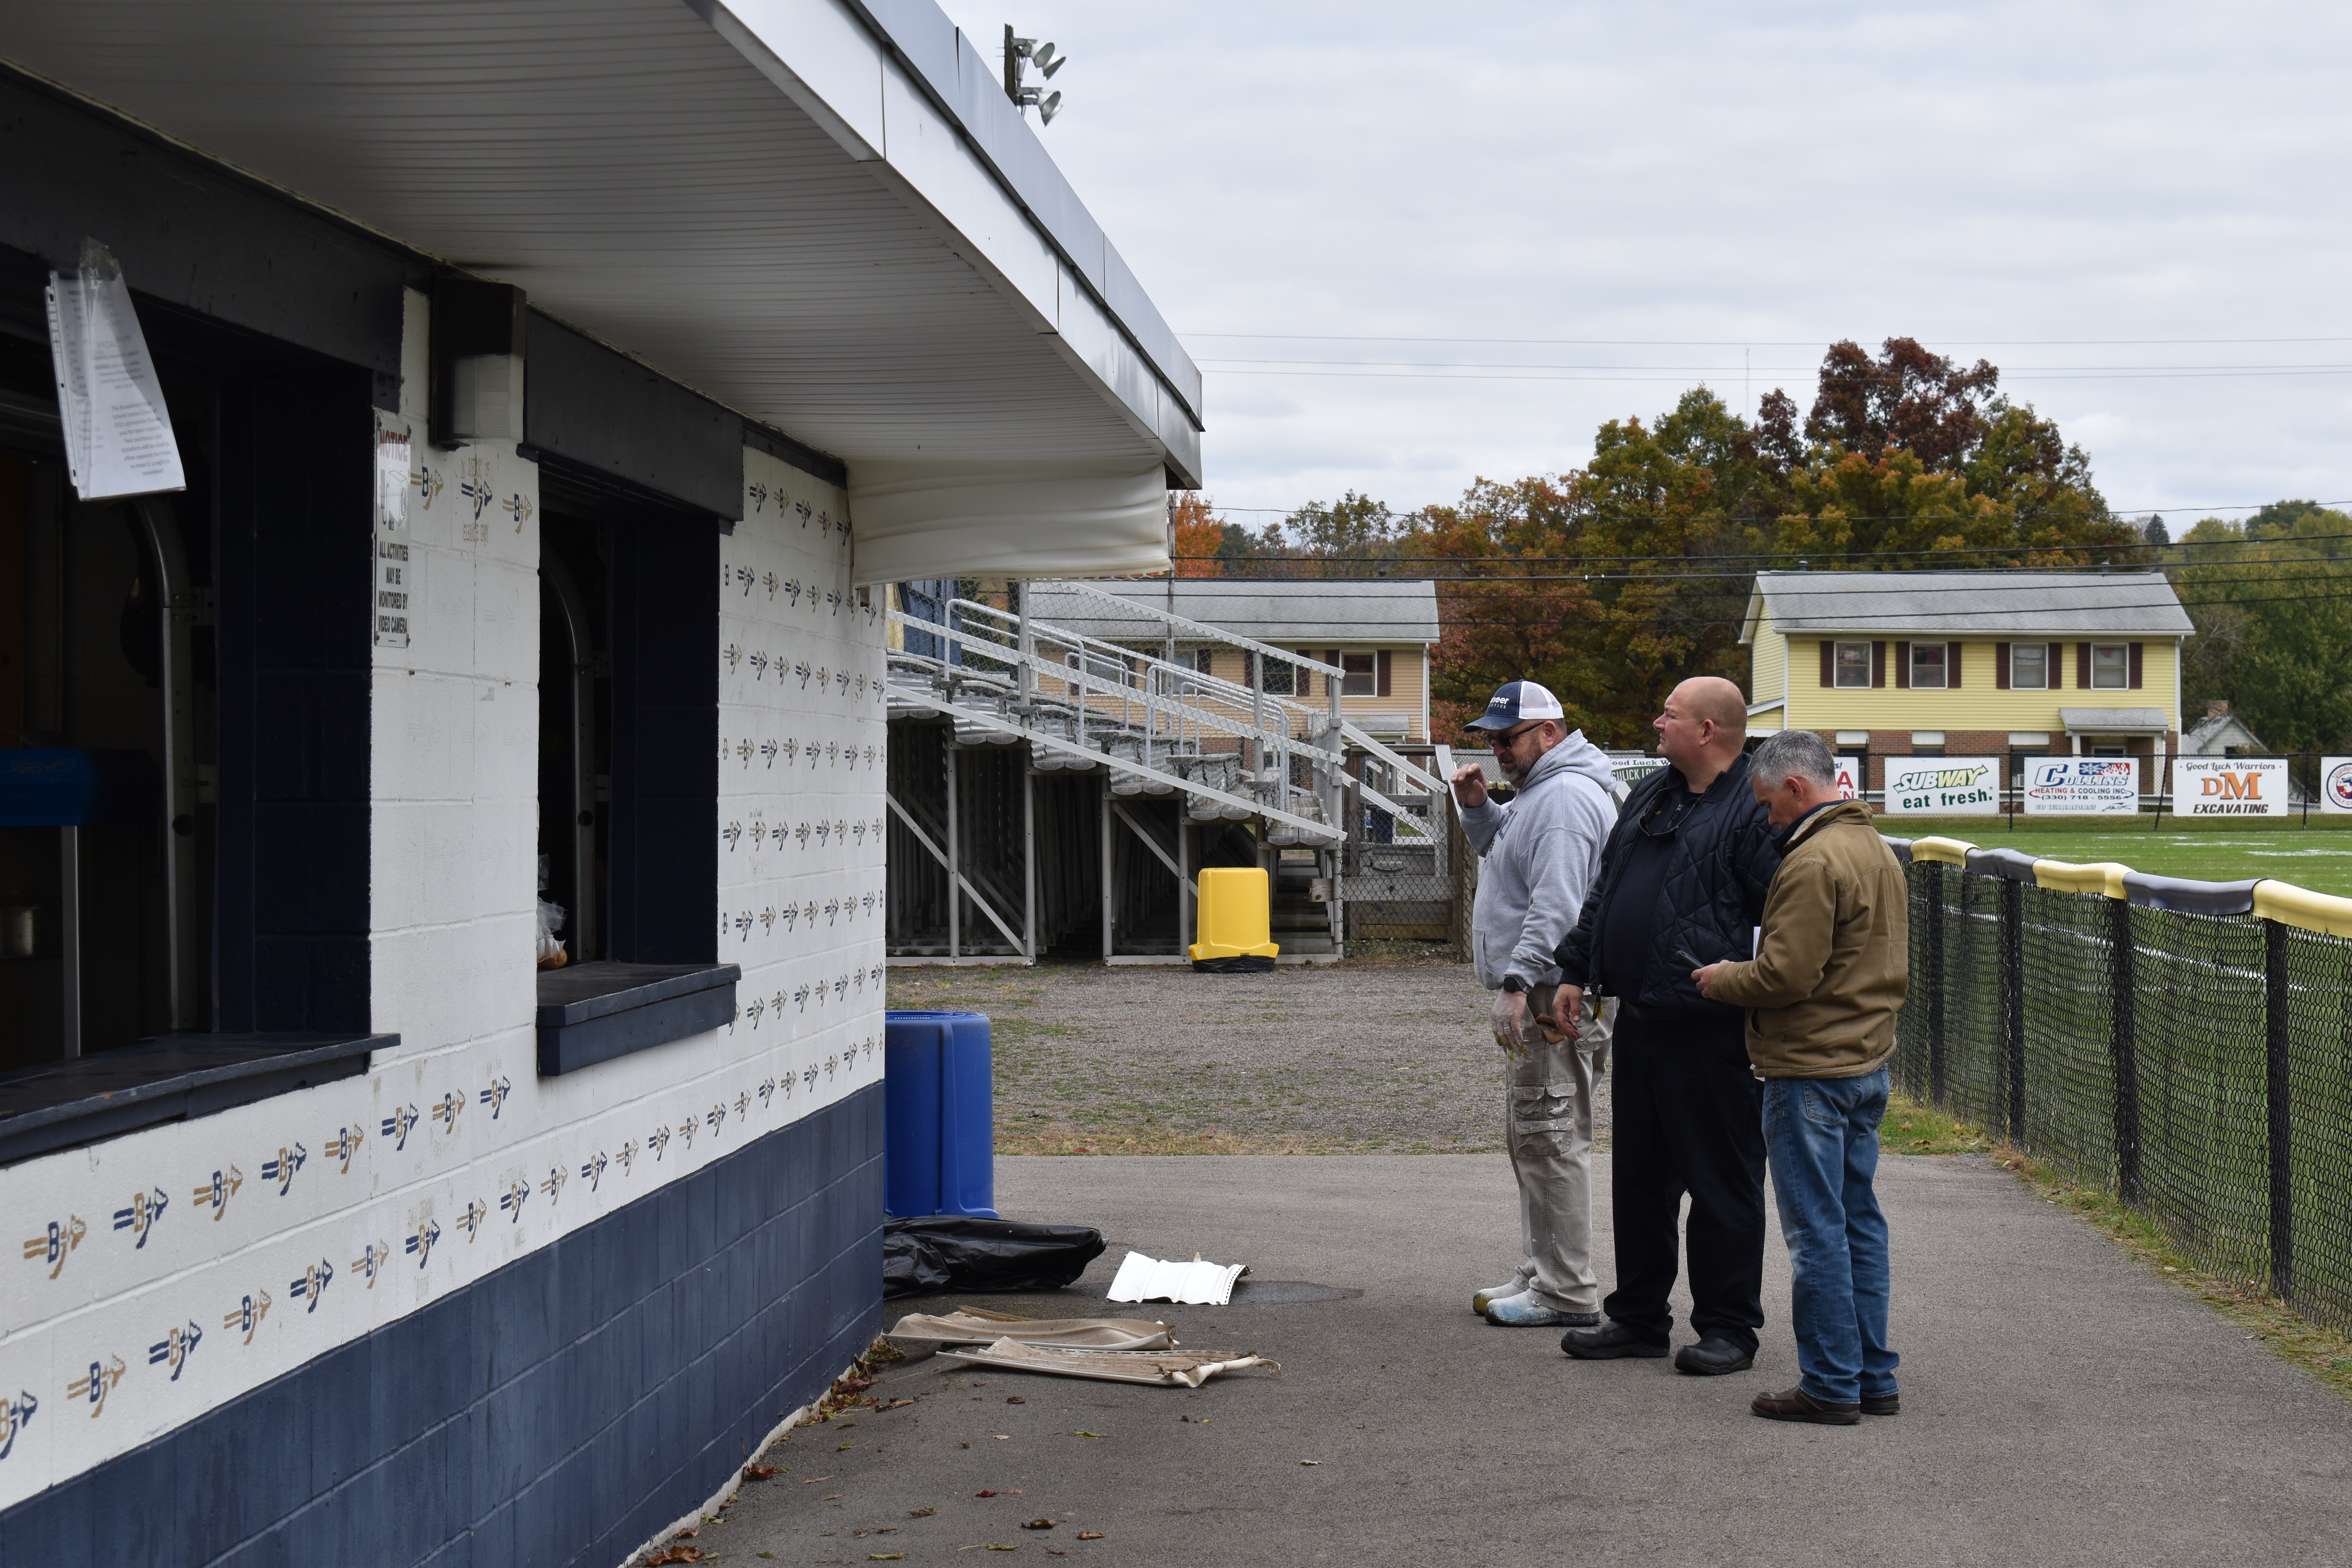 Brookfield school Maintenance Supervisor Randy Clark, left, and Supt. Toby Gibson, right, confer with Brookfield Fire Chief David Masirovits, who was investigating a fire at the football field concession stand.